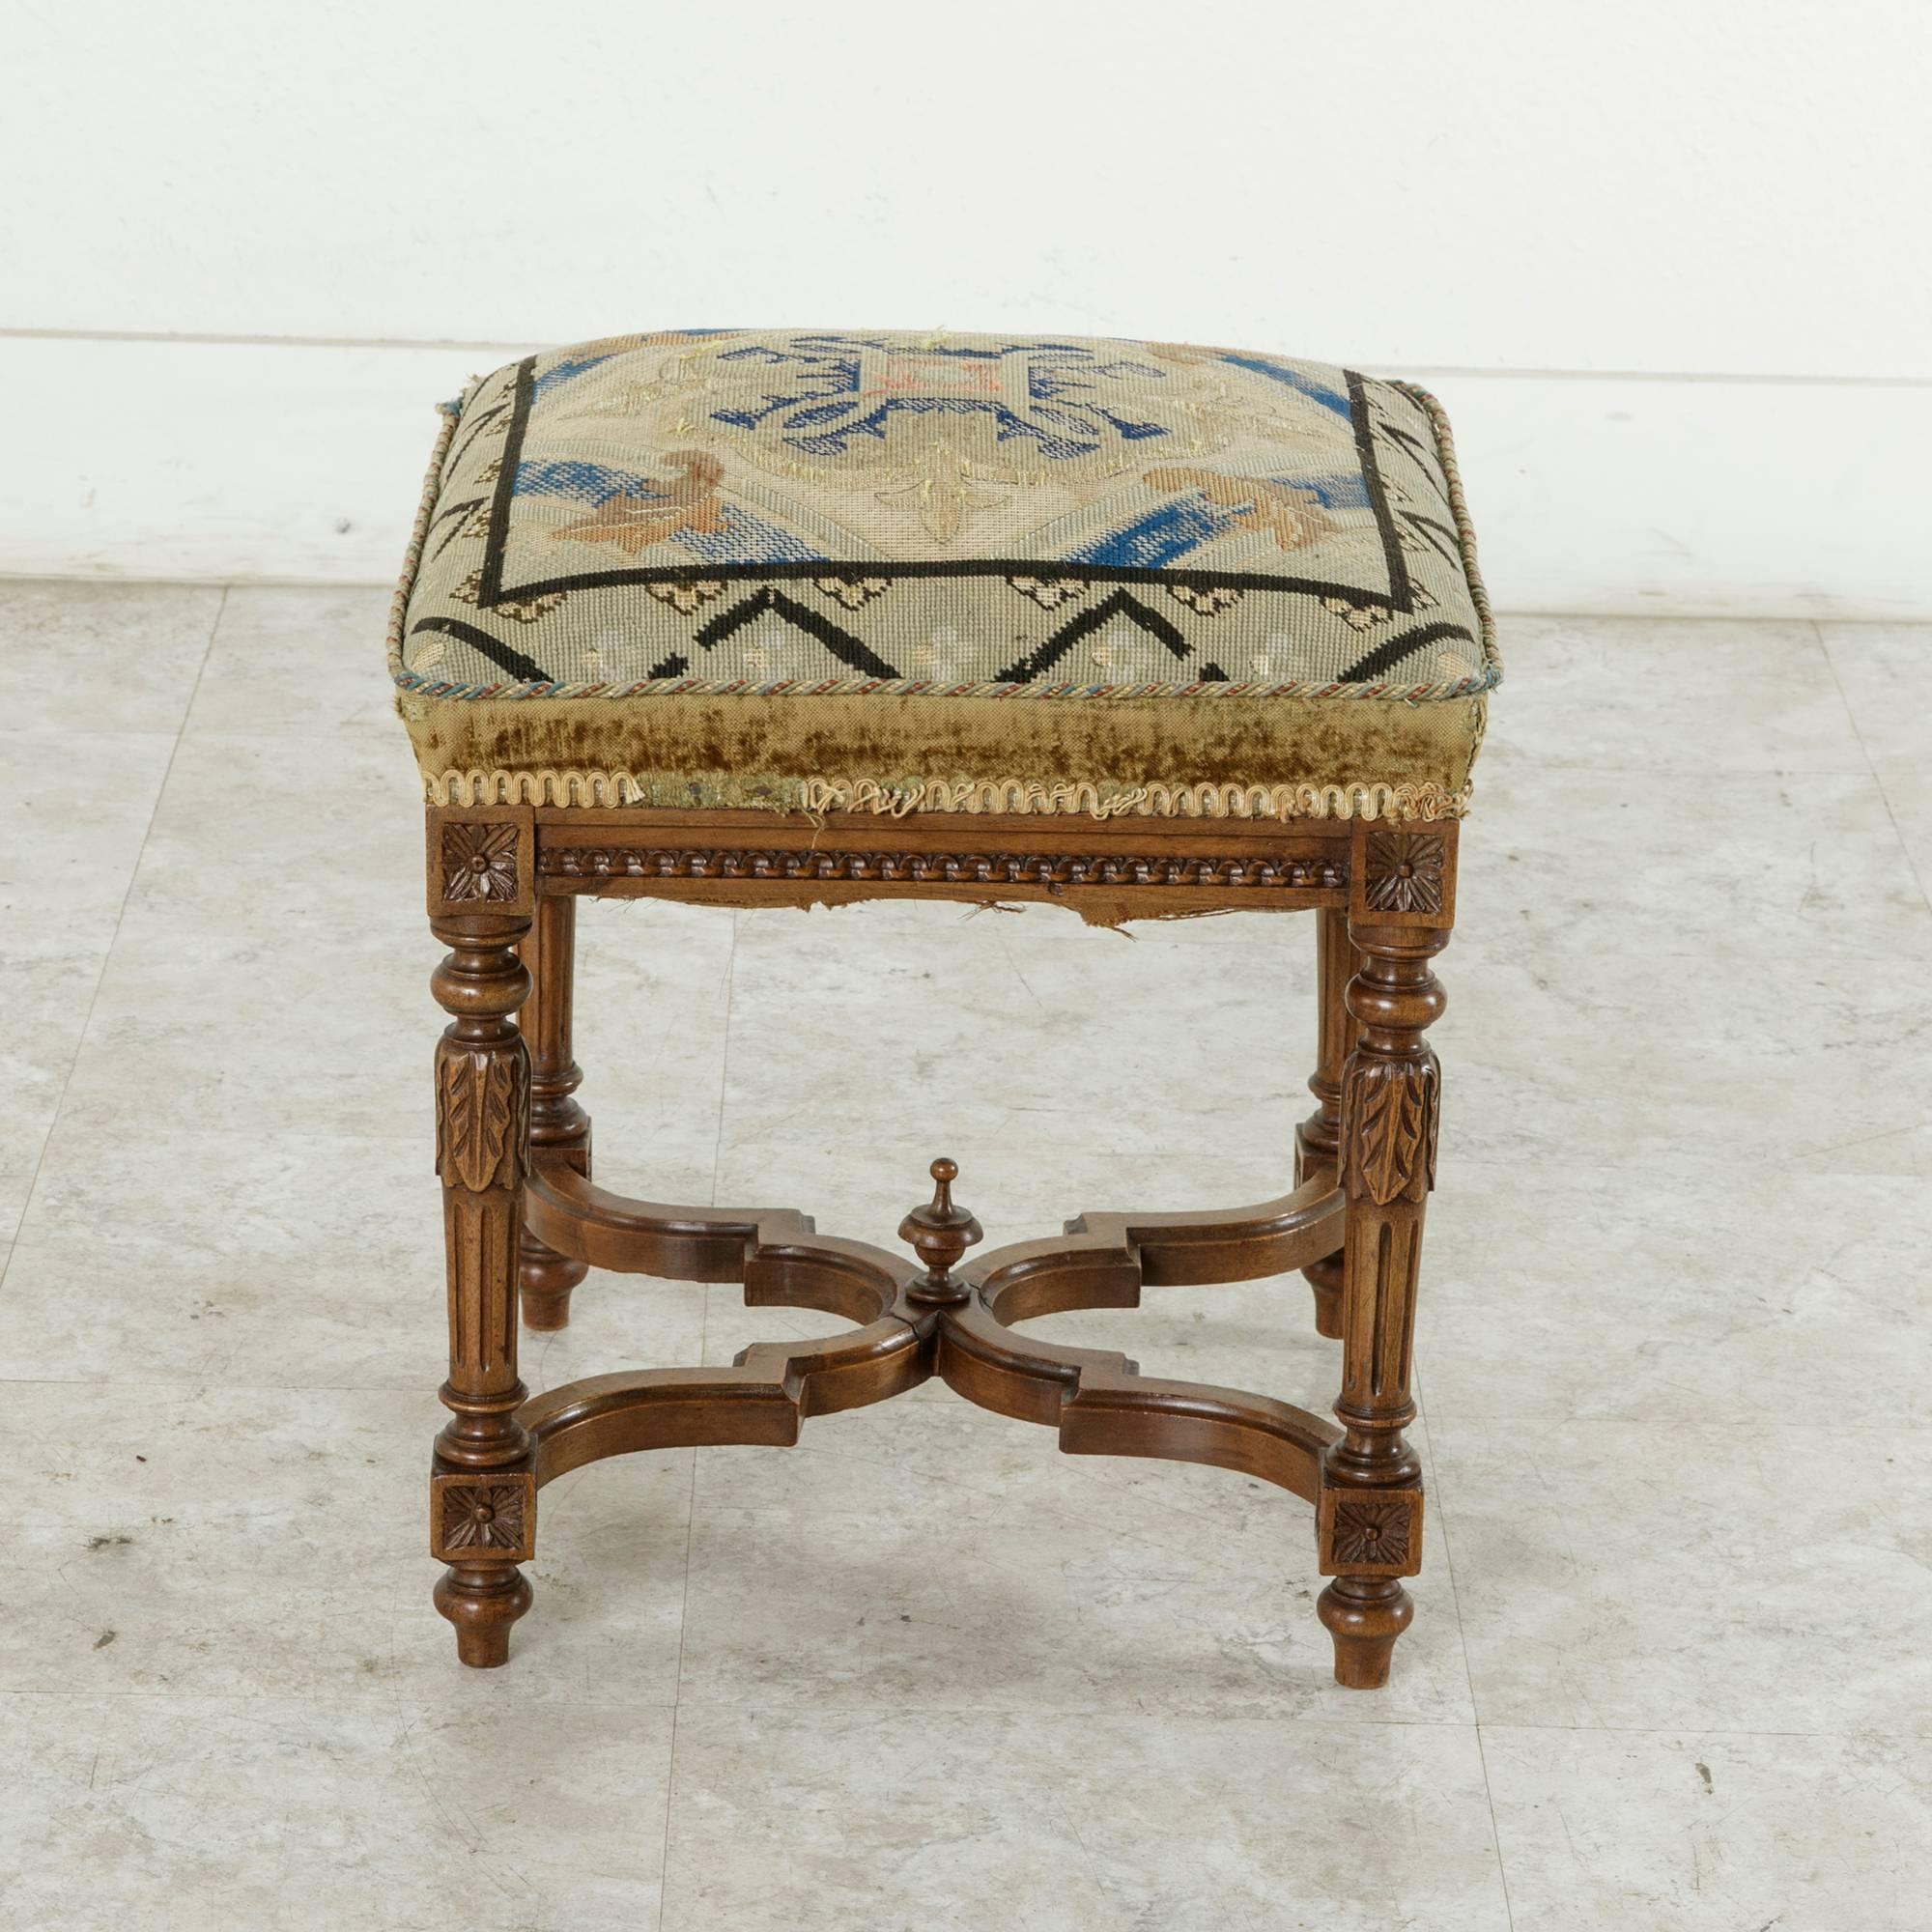 Late 19th Century 19th Century Hand-Carved Walnut Louis XVI Style Vanity Stool with Needlepoint